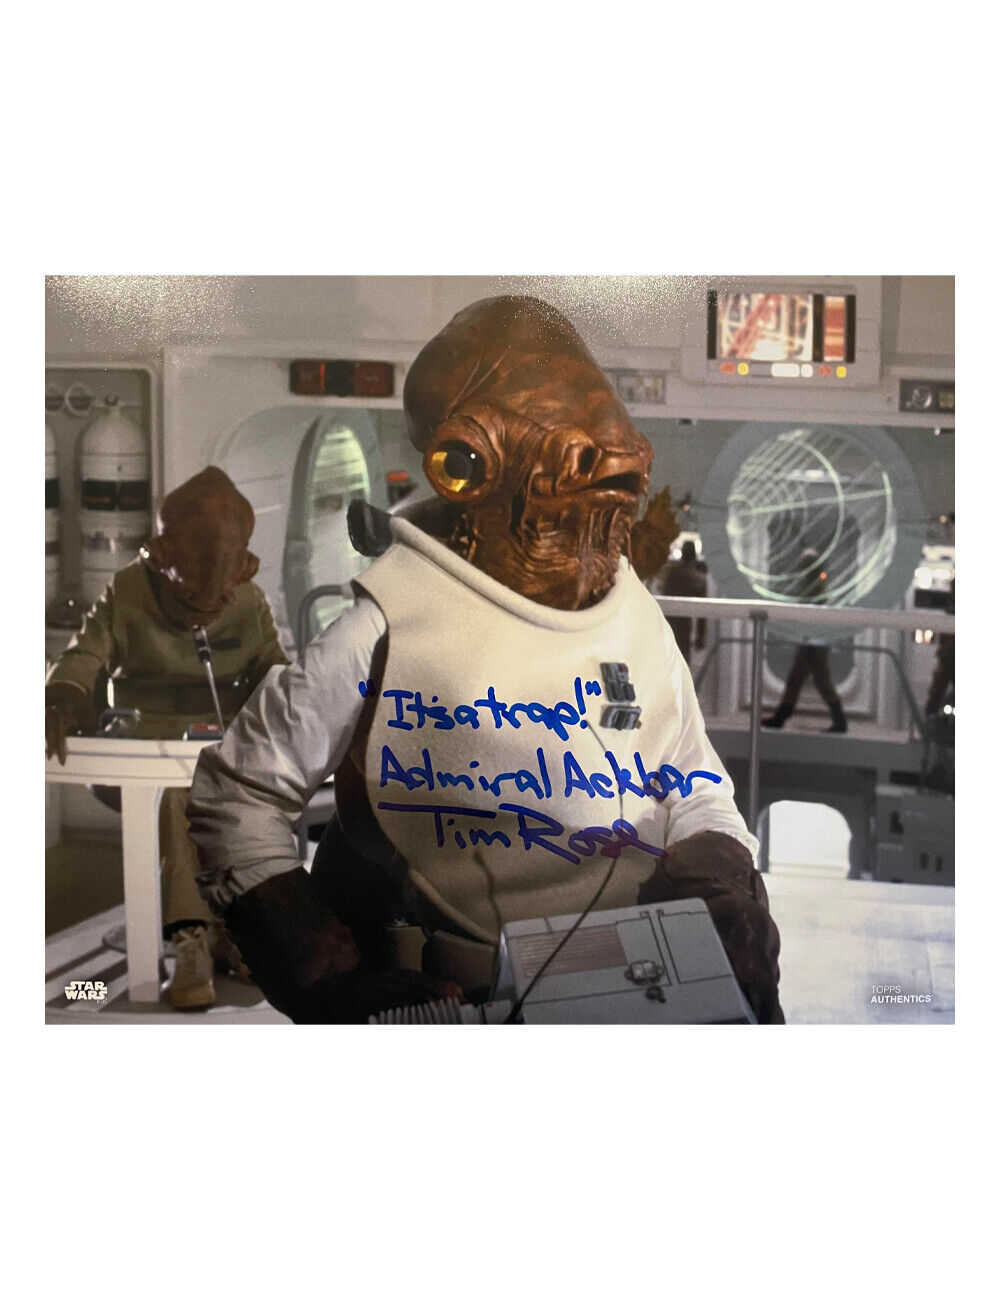 10x8 Star Wars Admiral Ackbar Print Signed by Tim Rose 100% Authentic + COA